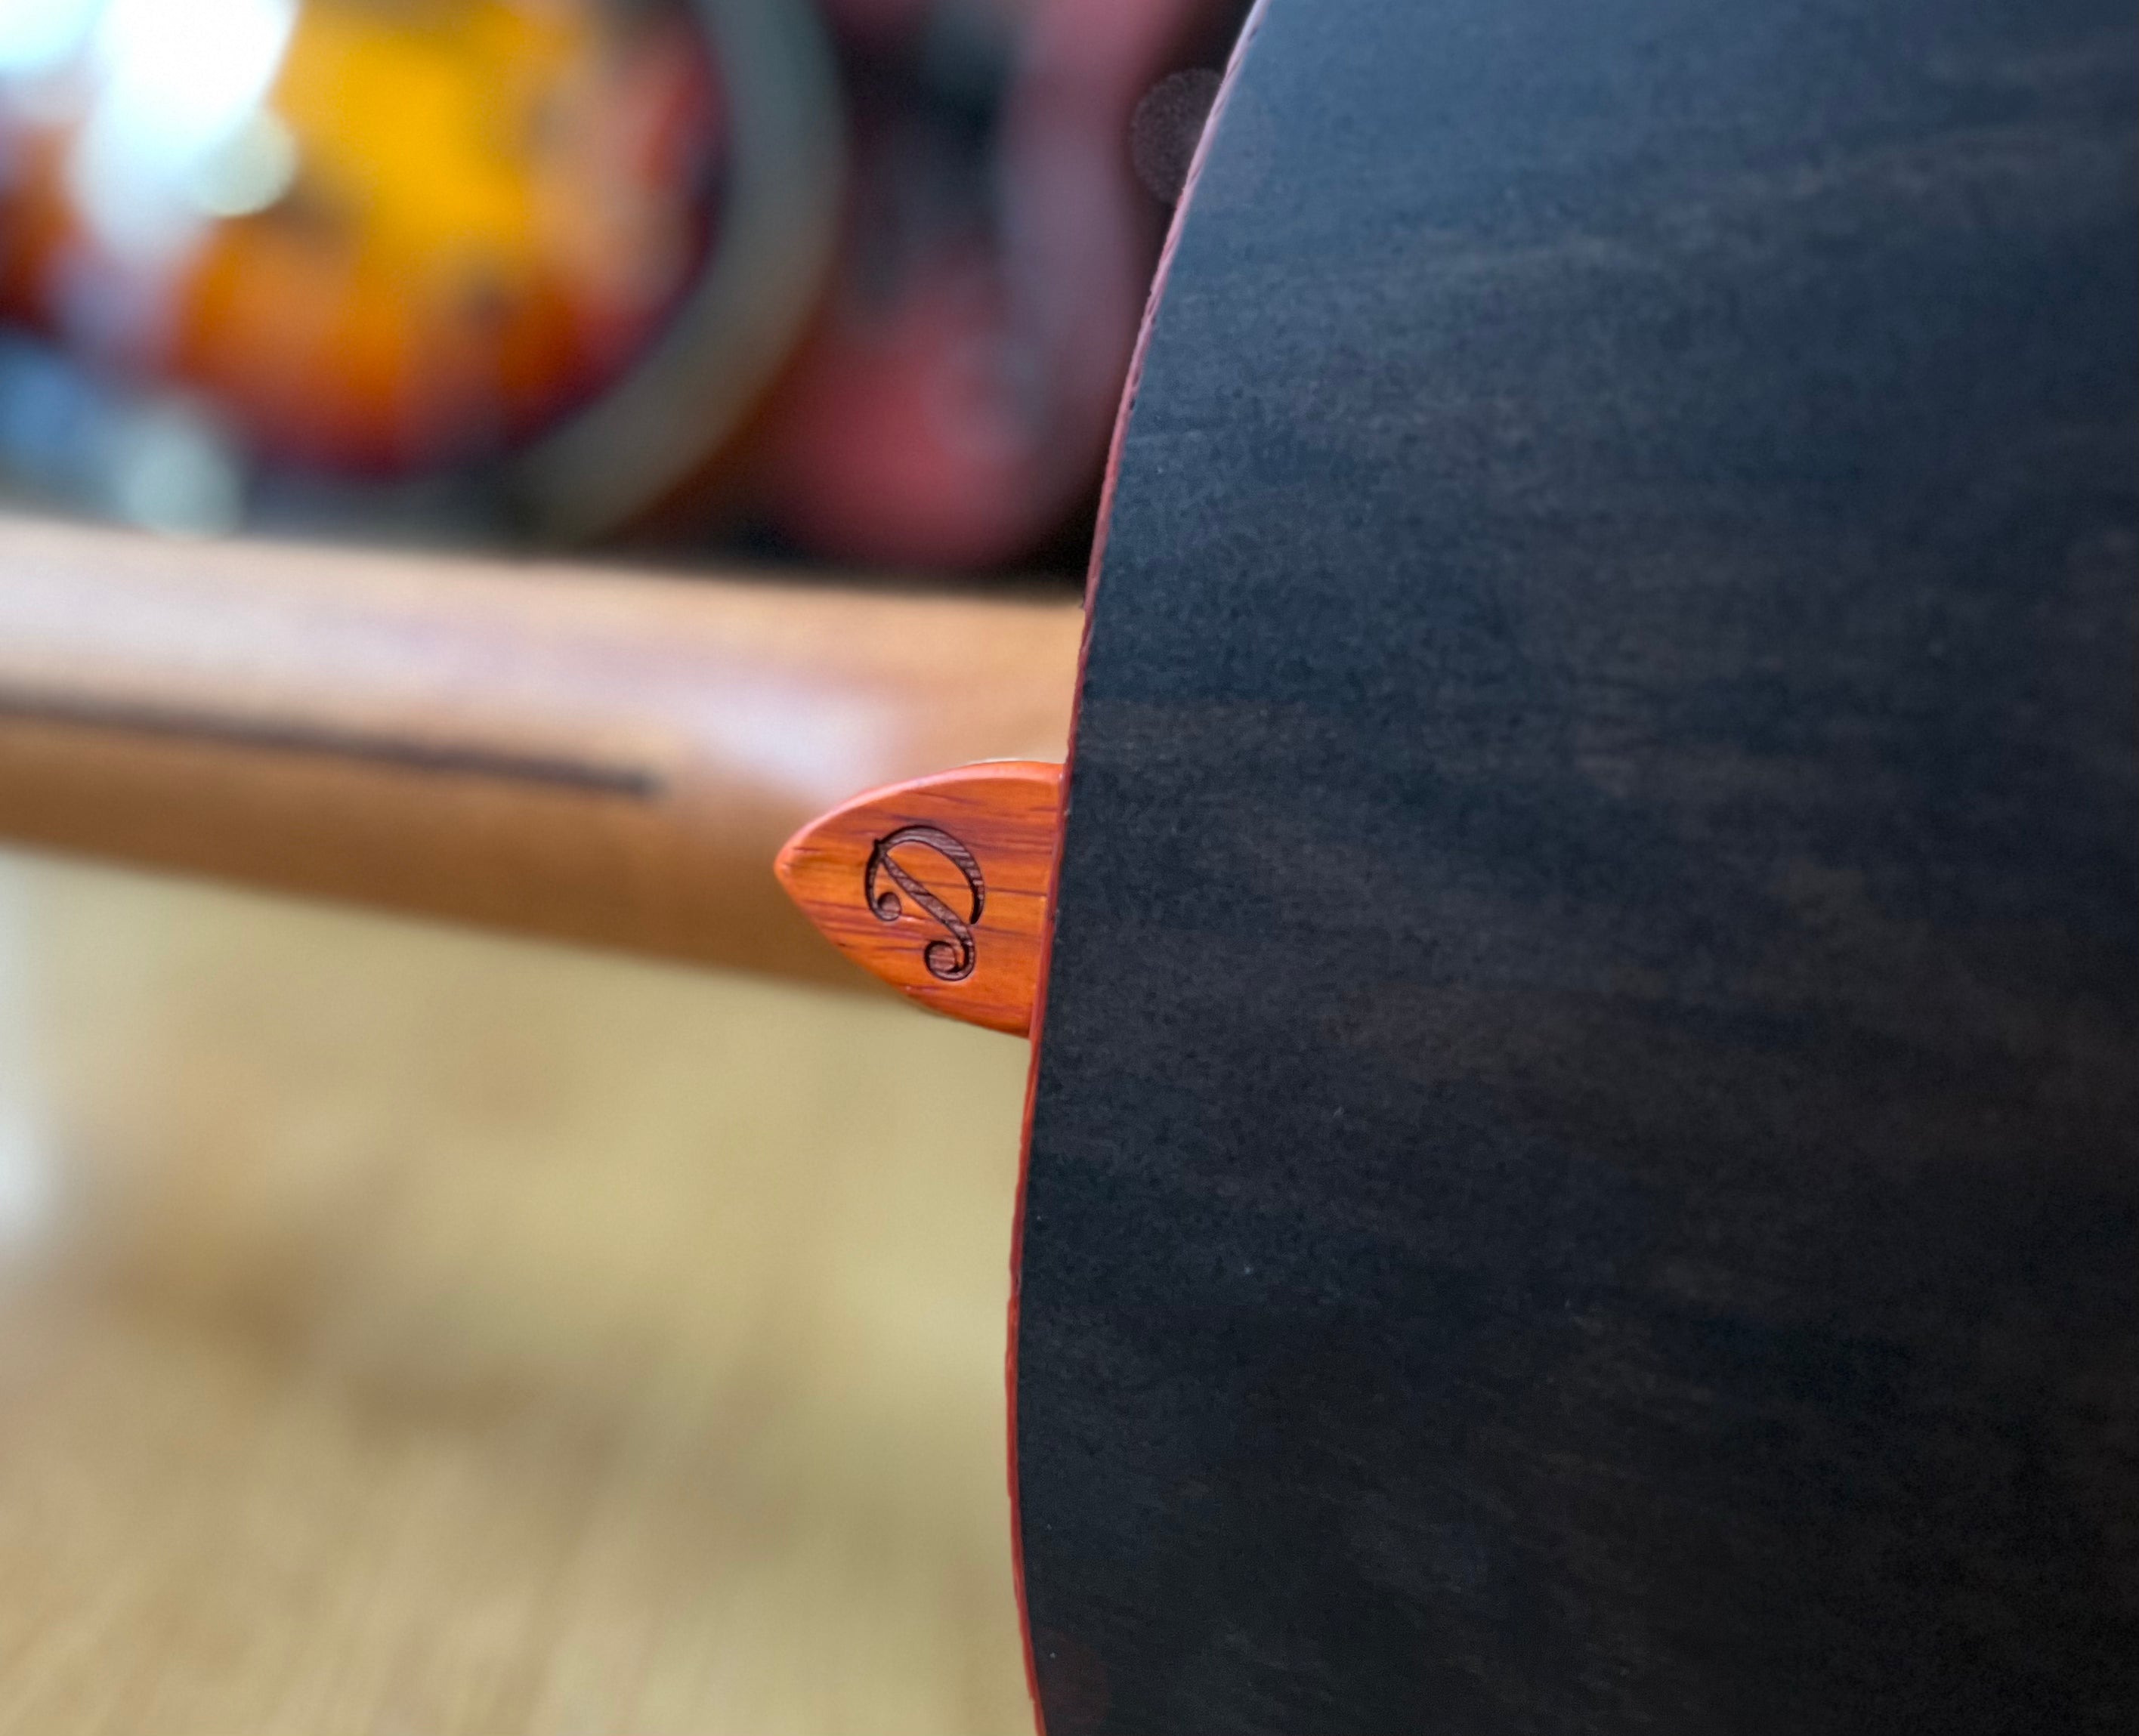 Dowina Figured Ebony OMG Deluxe Masters With Torrifed Swiss Moon Spruce Top, Acoustic Guitar for sale at Richards Guitars.